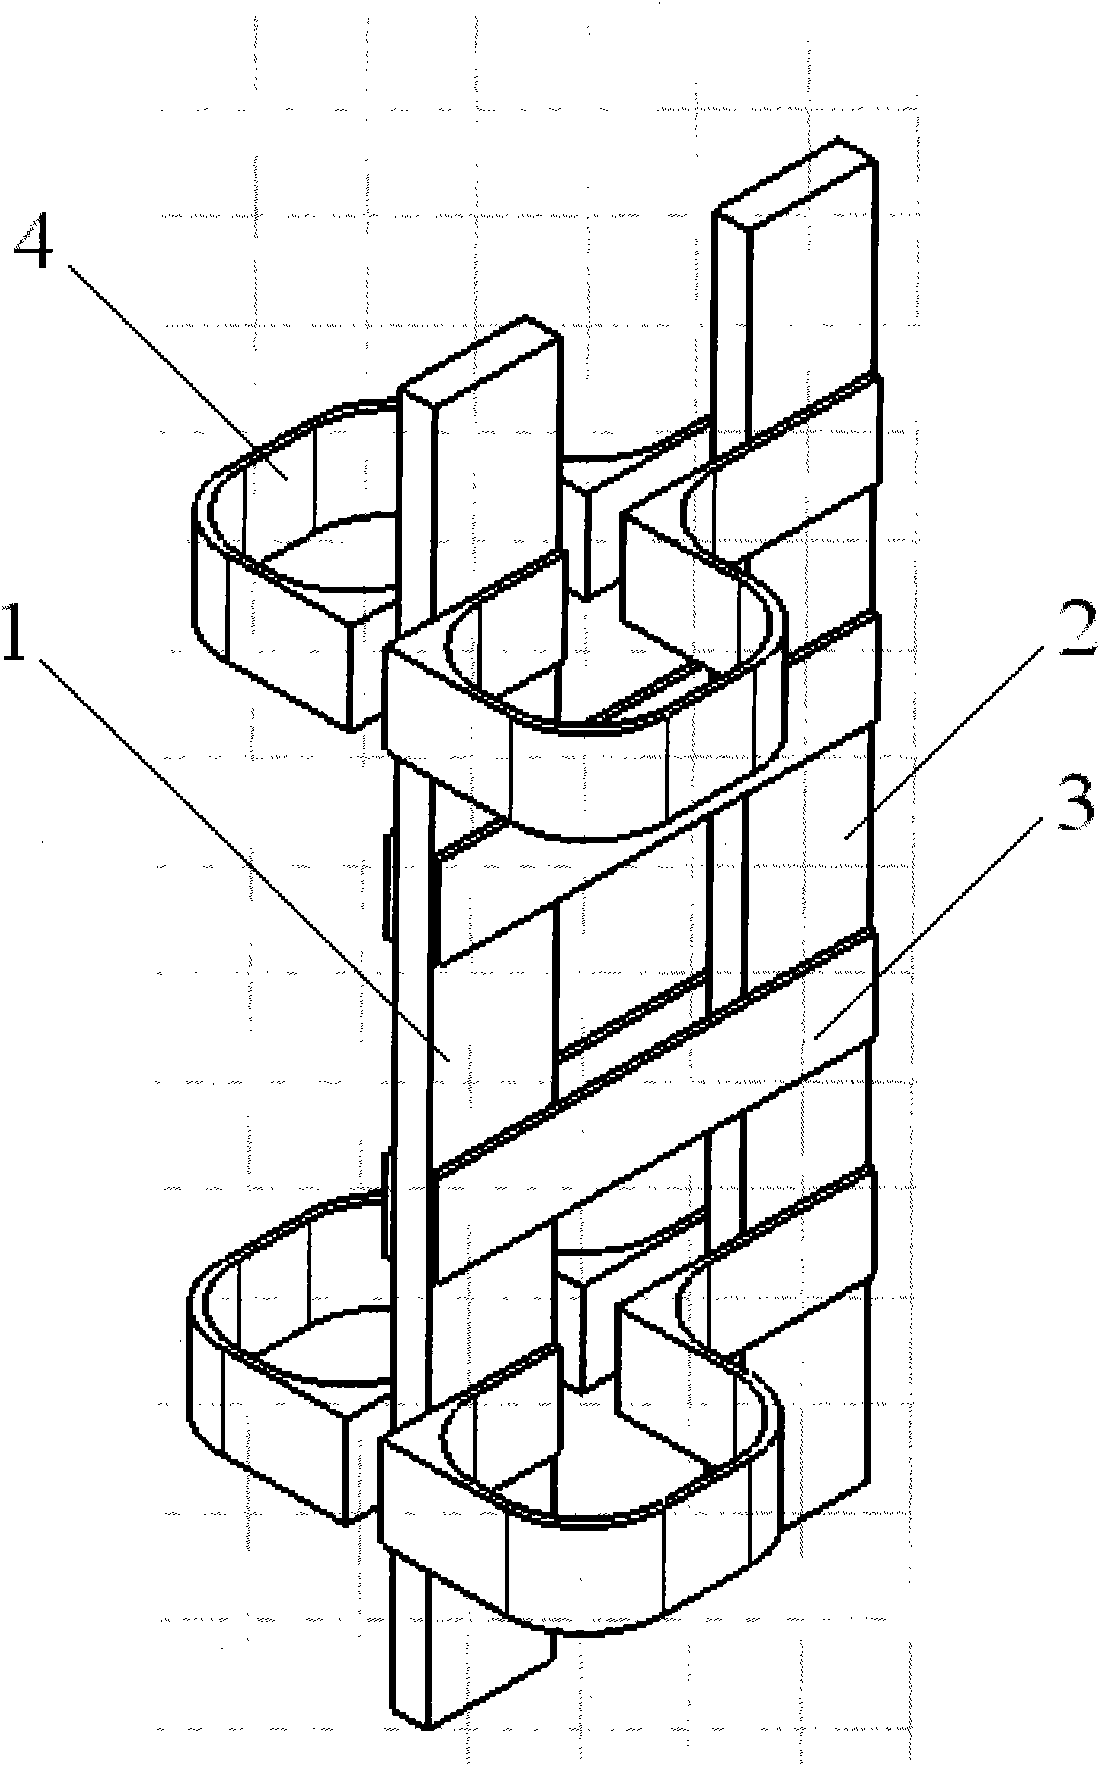 Current equalizing structure of high-current rectifier bridge arm